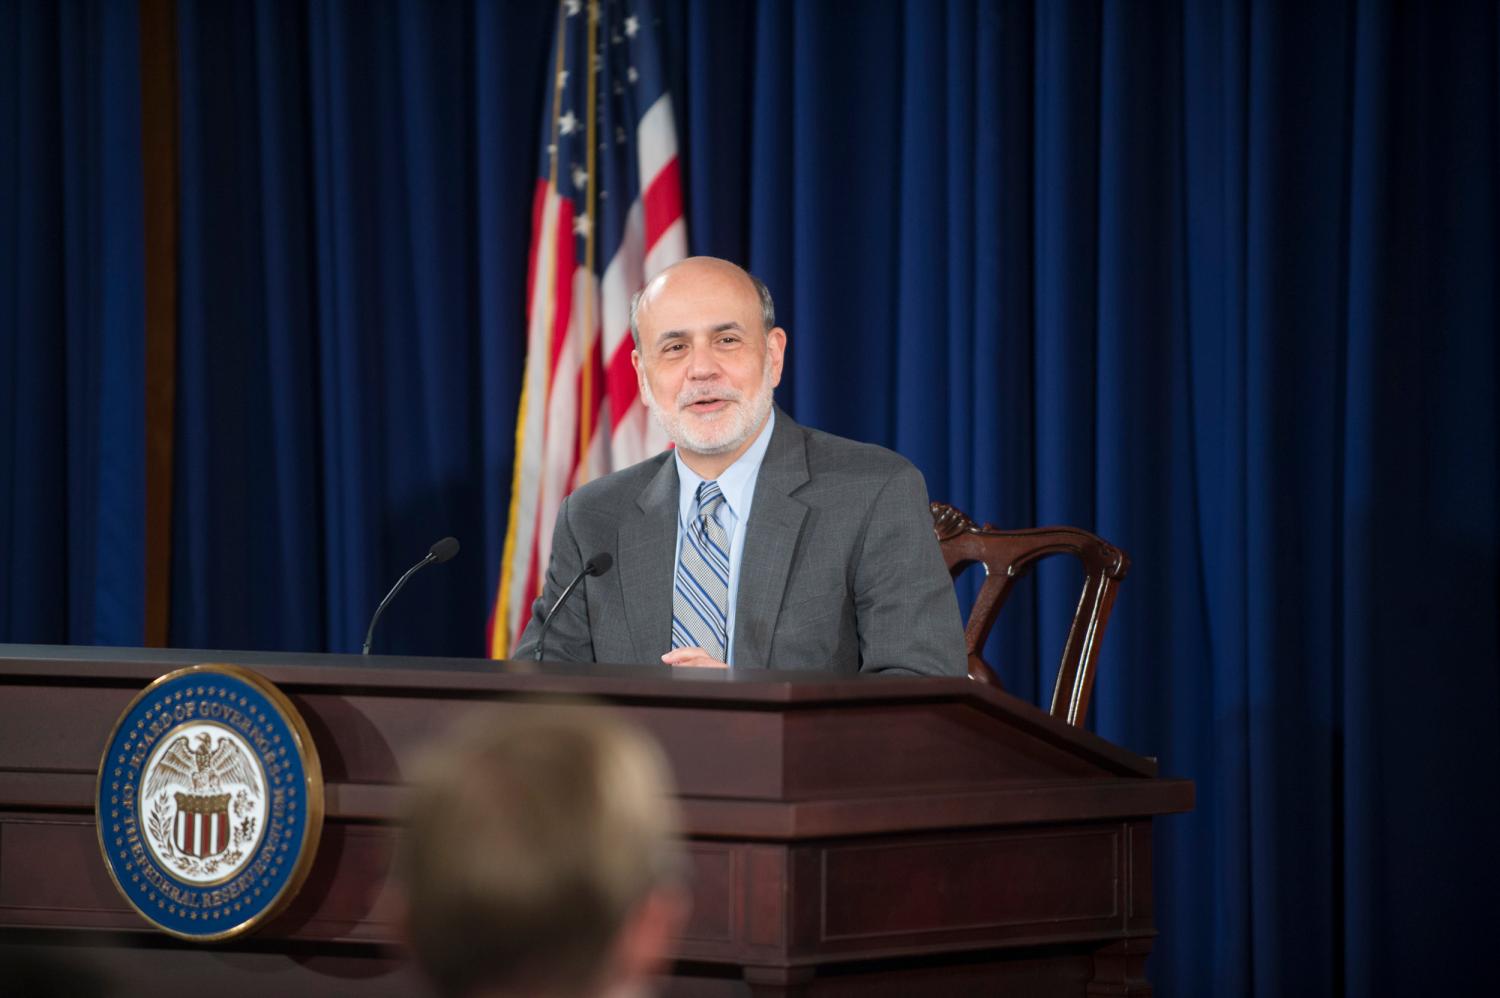 Chairman Ben S. Bernanke responds to a reporter the question-and-answer portion of the press conference on September 18, 2013. The event followed the September 17-18 meeting of the Federal Open Market Committee (FOMC).